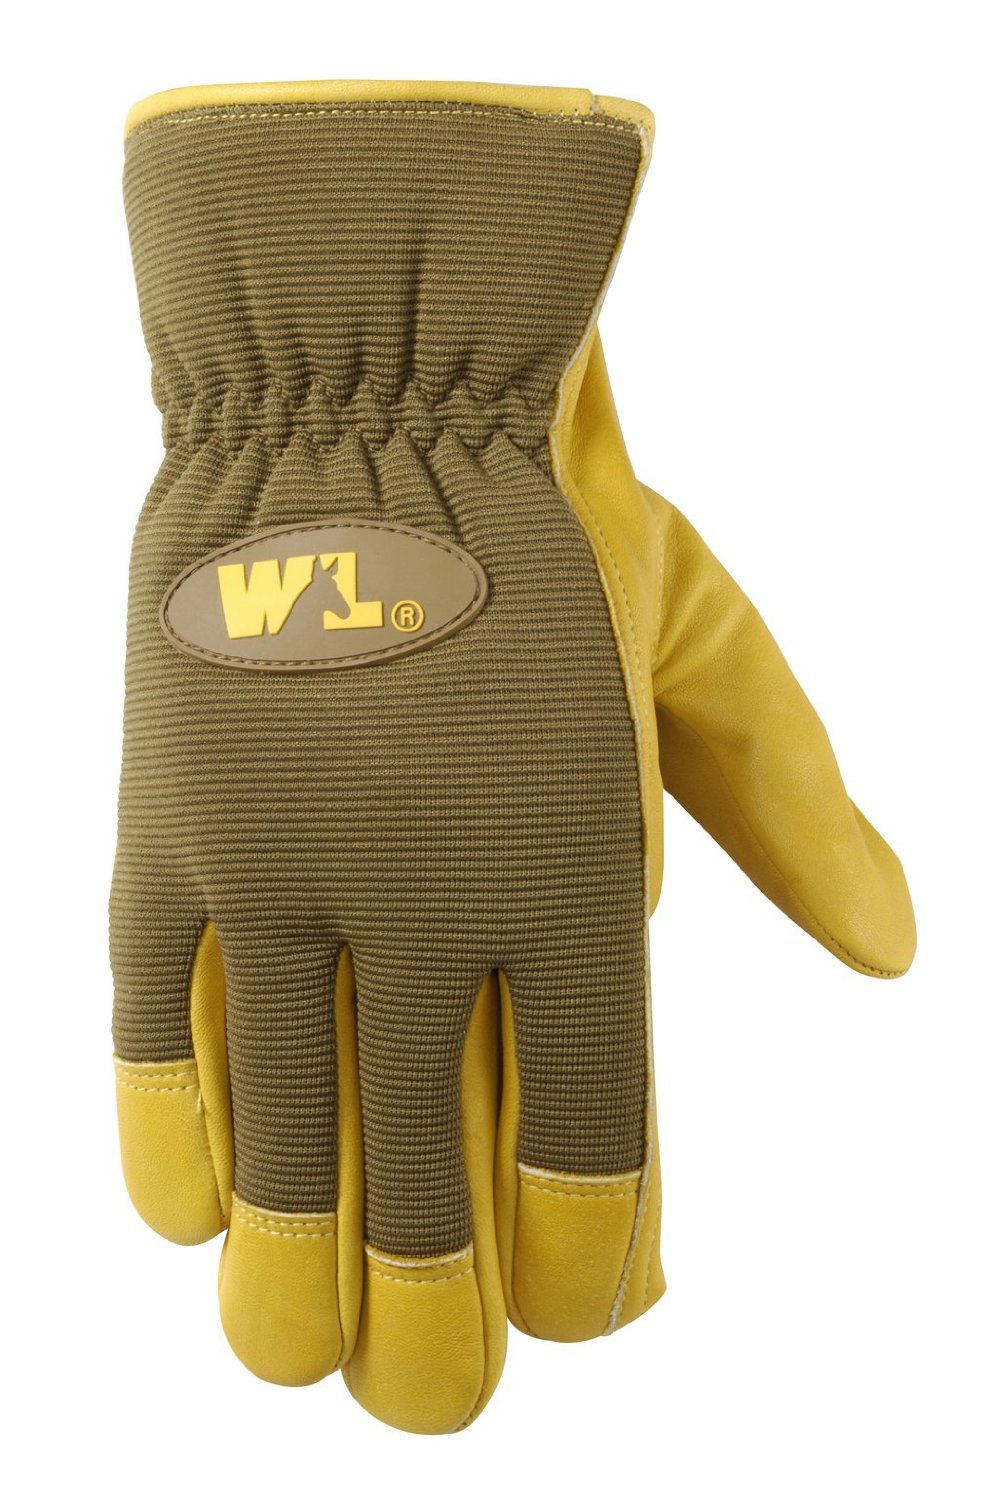 Wells Lamont Gloves, Cowhide, Heavy Duty, Extra Large